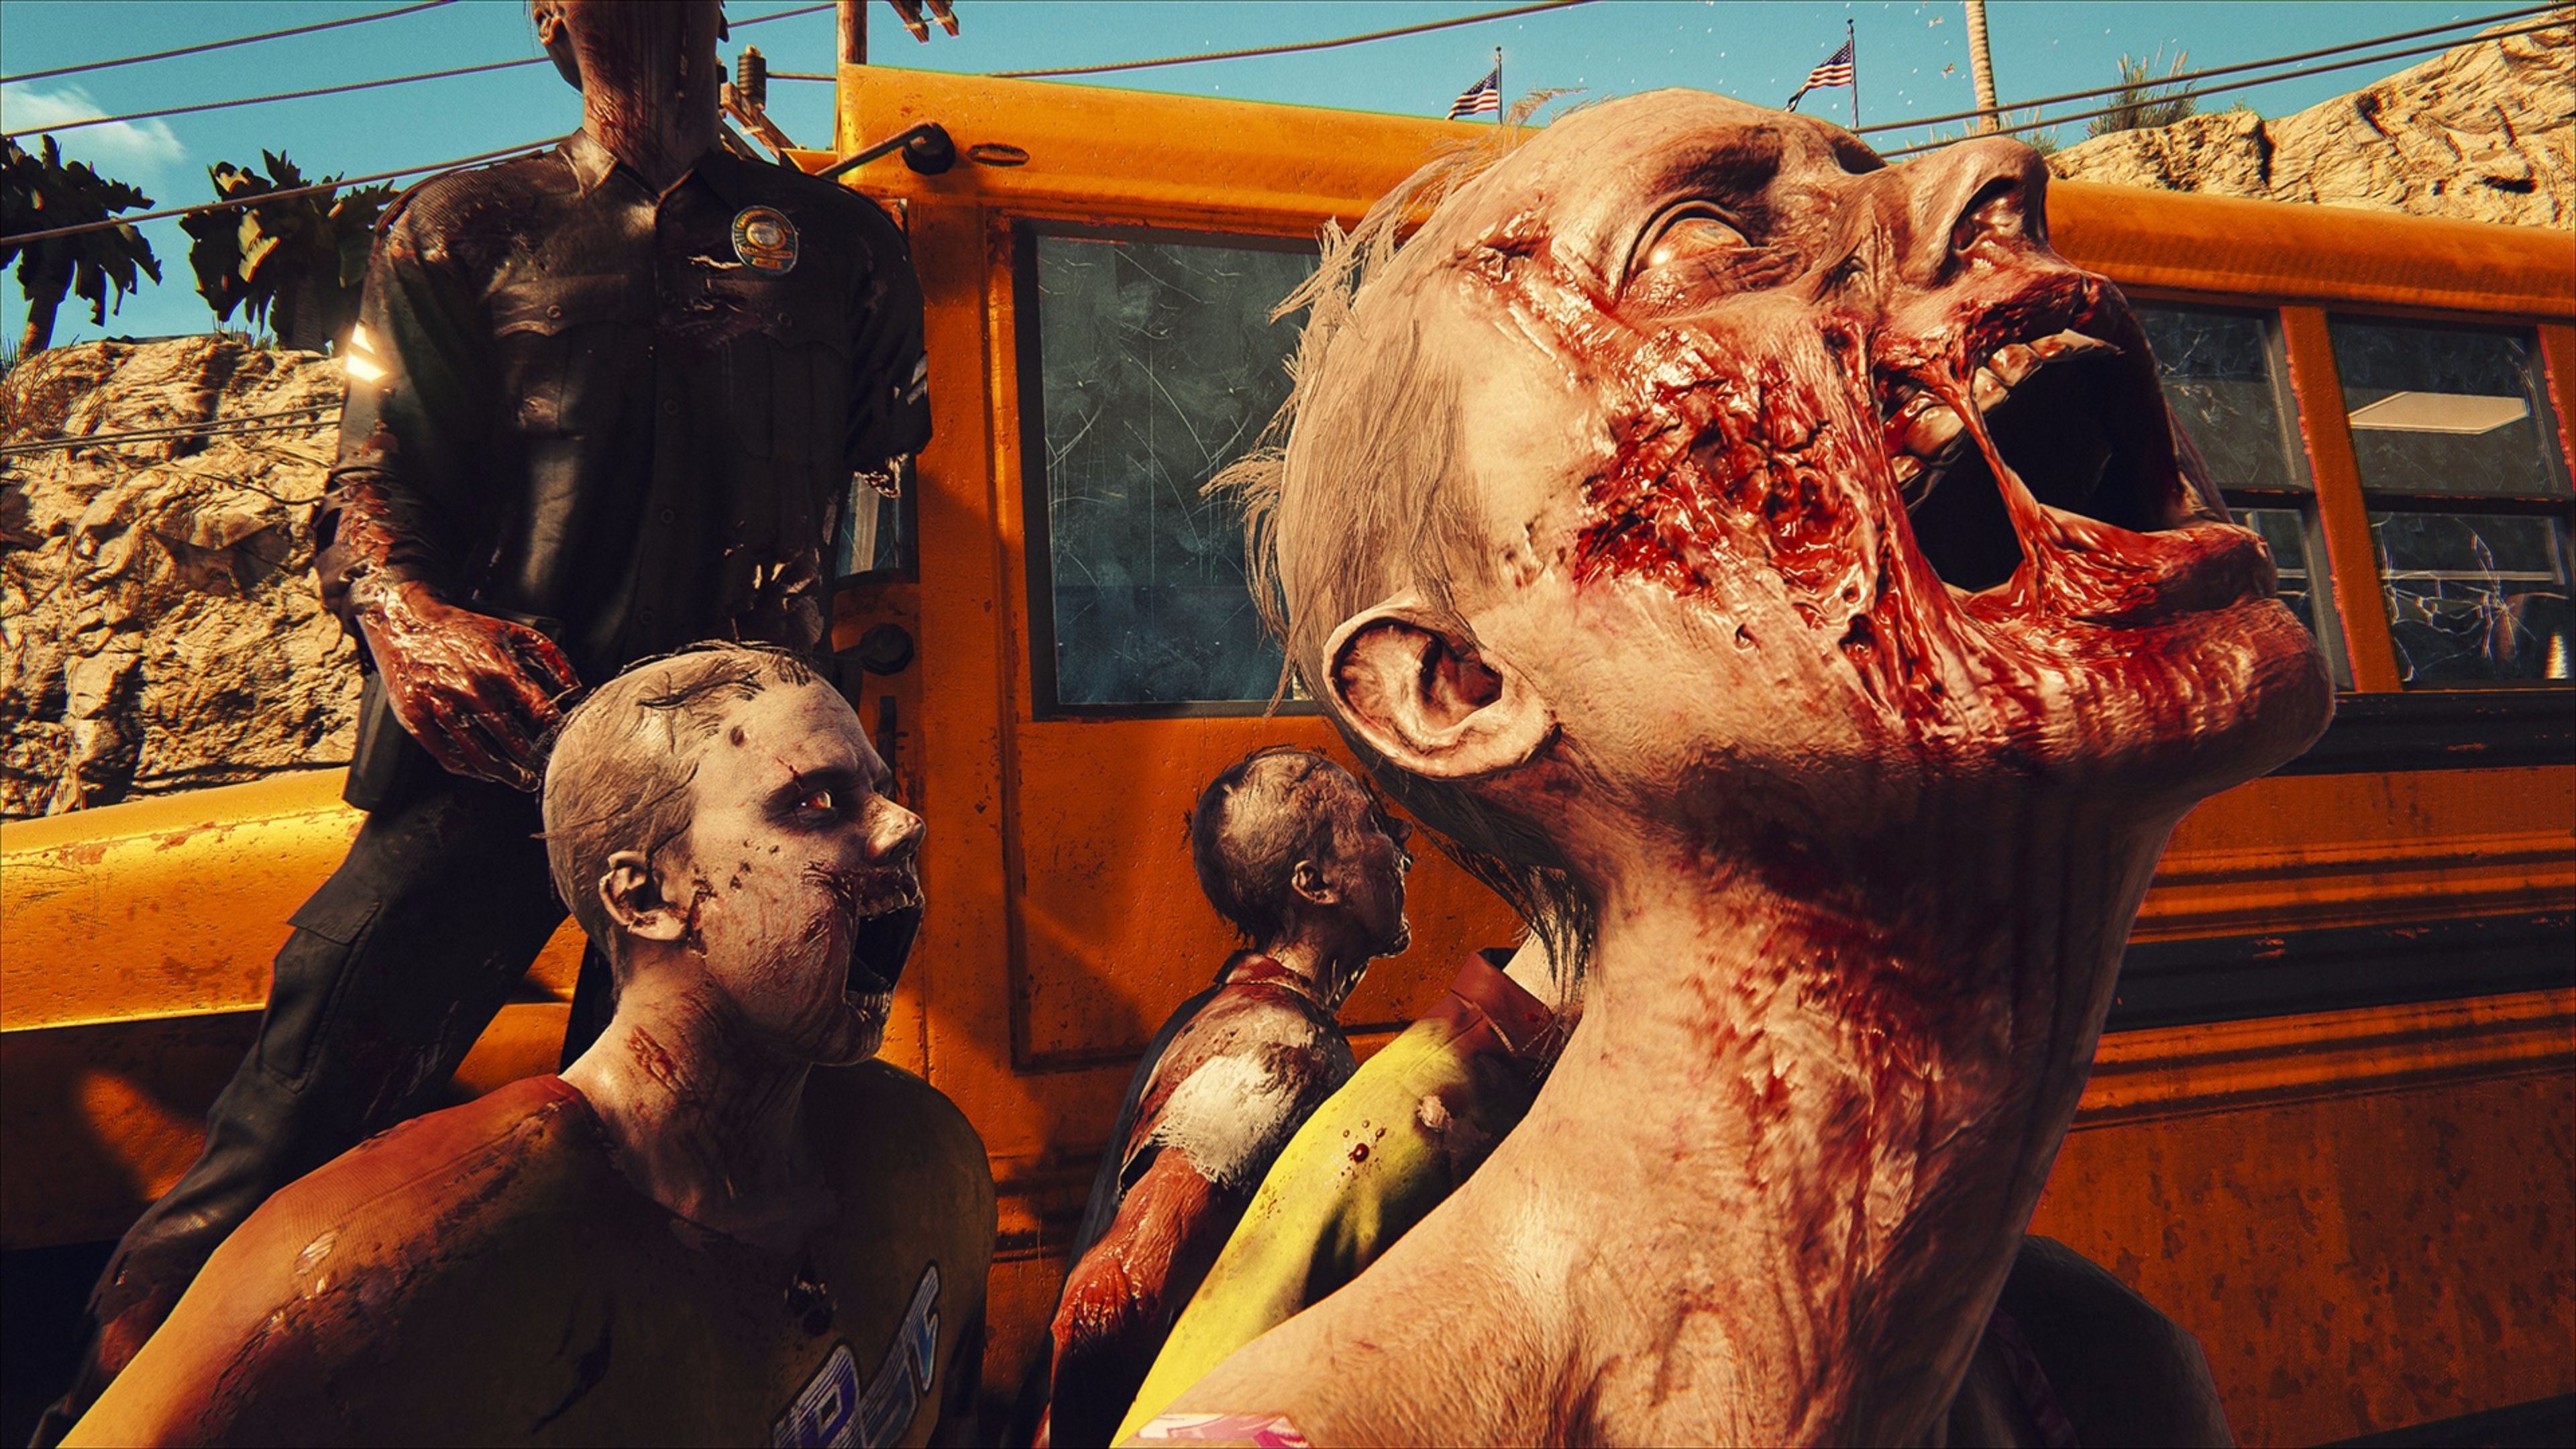 dead island 2 war of roses game